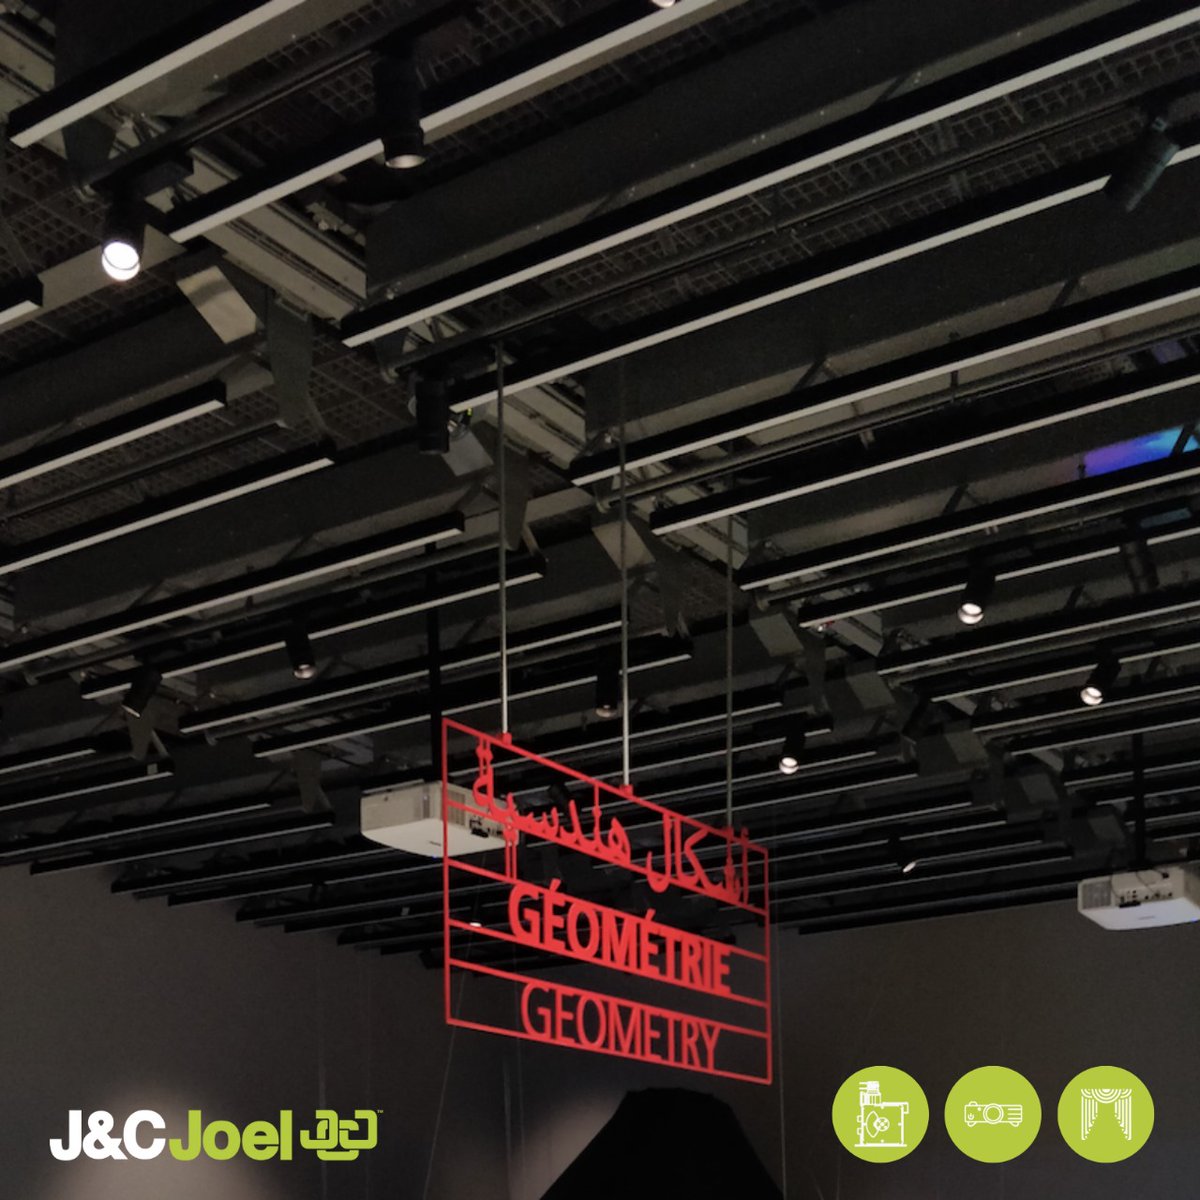 Transforming spaces with J&C Joel solutions! 🔮✨ We used 228 motorized sliding beams, creating a dynamic support platform for projectors and versatile LED lighting. 🎥💡 These wirelessly controlled systems give lighting designers many options.🚀 #mechanical #bespokedrapery